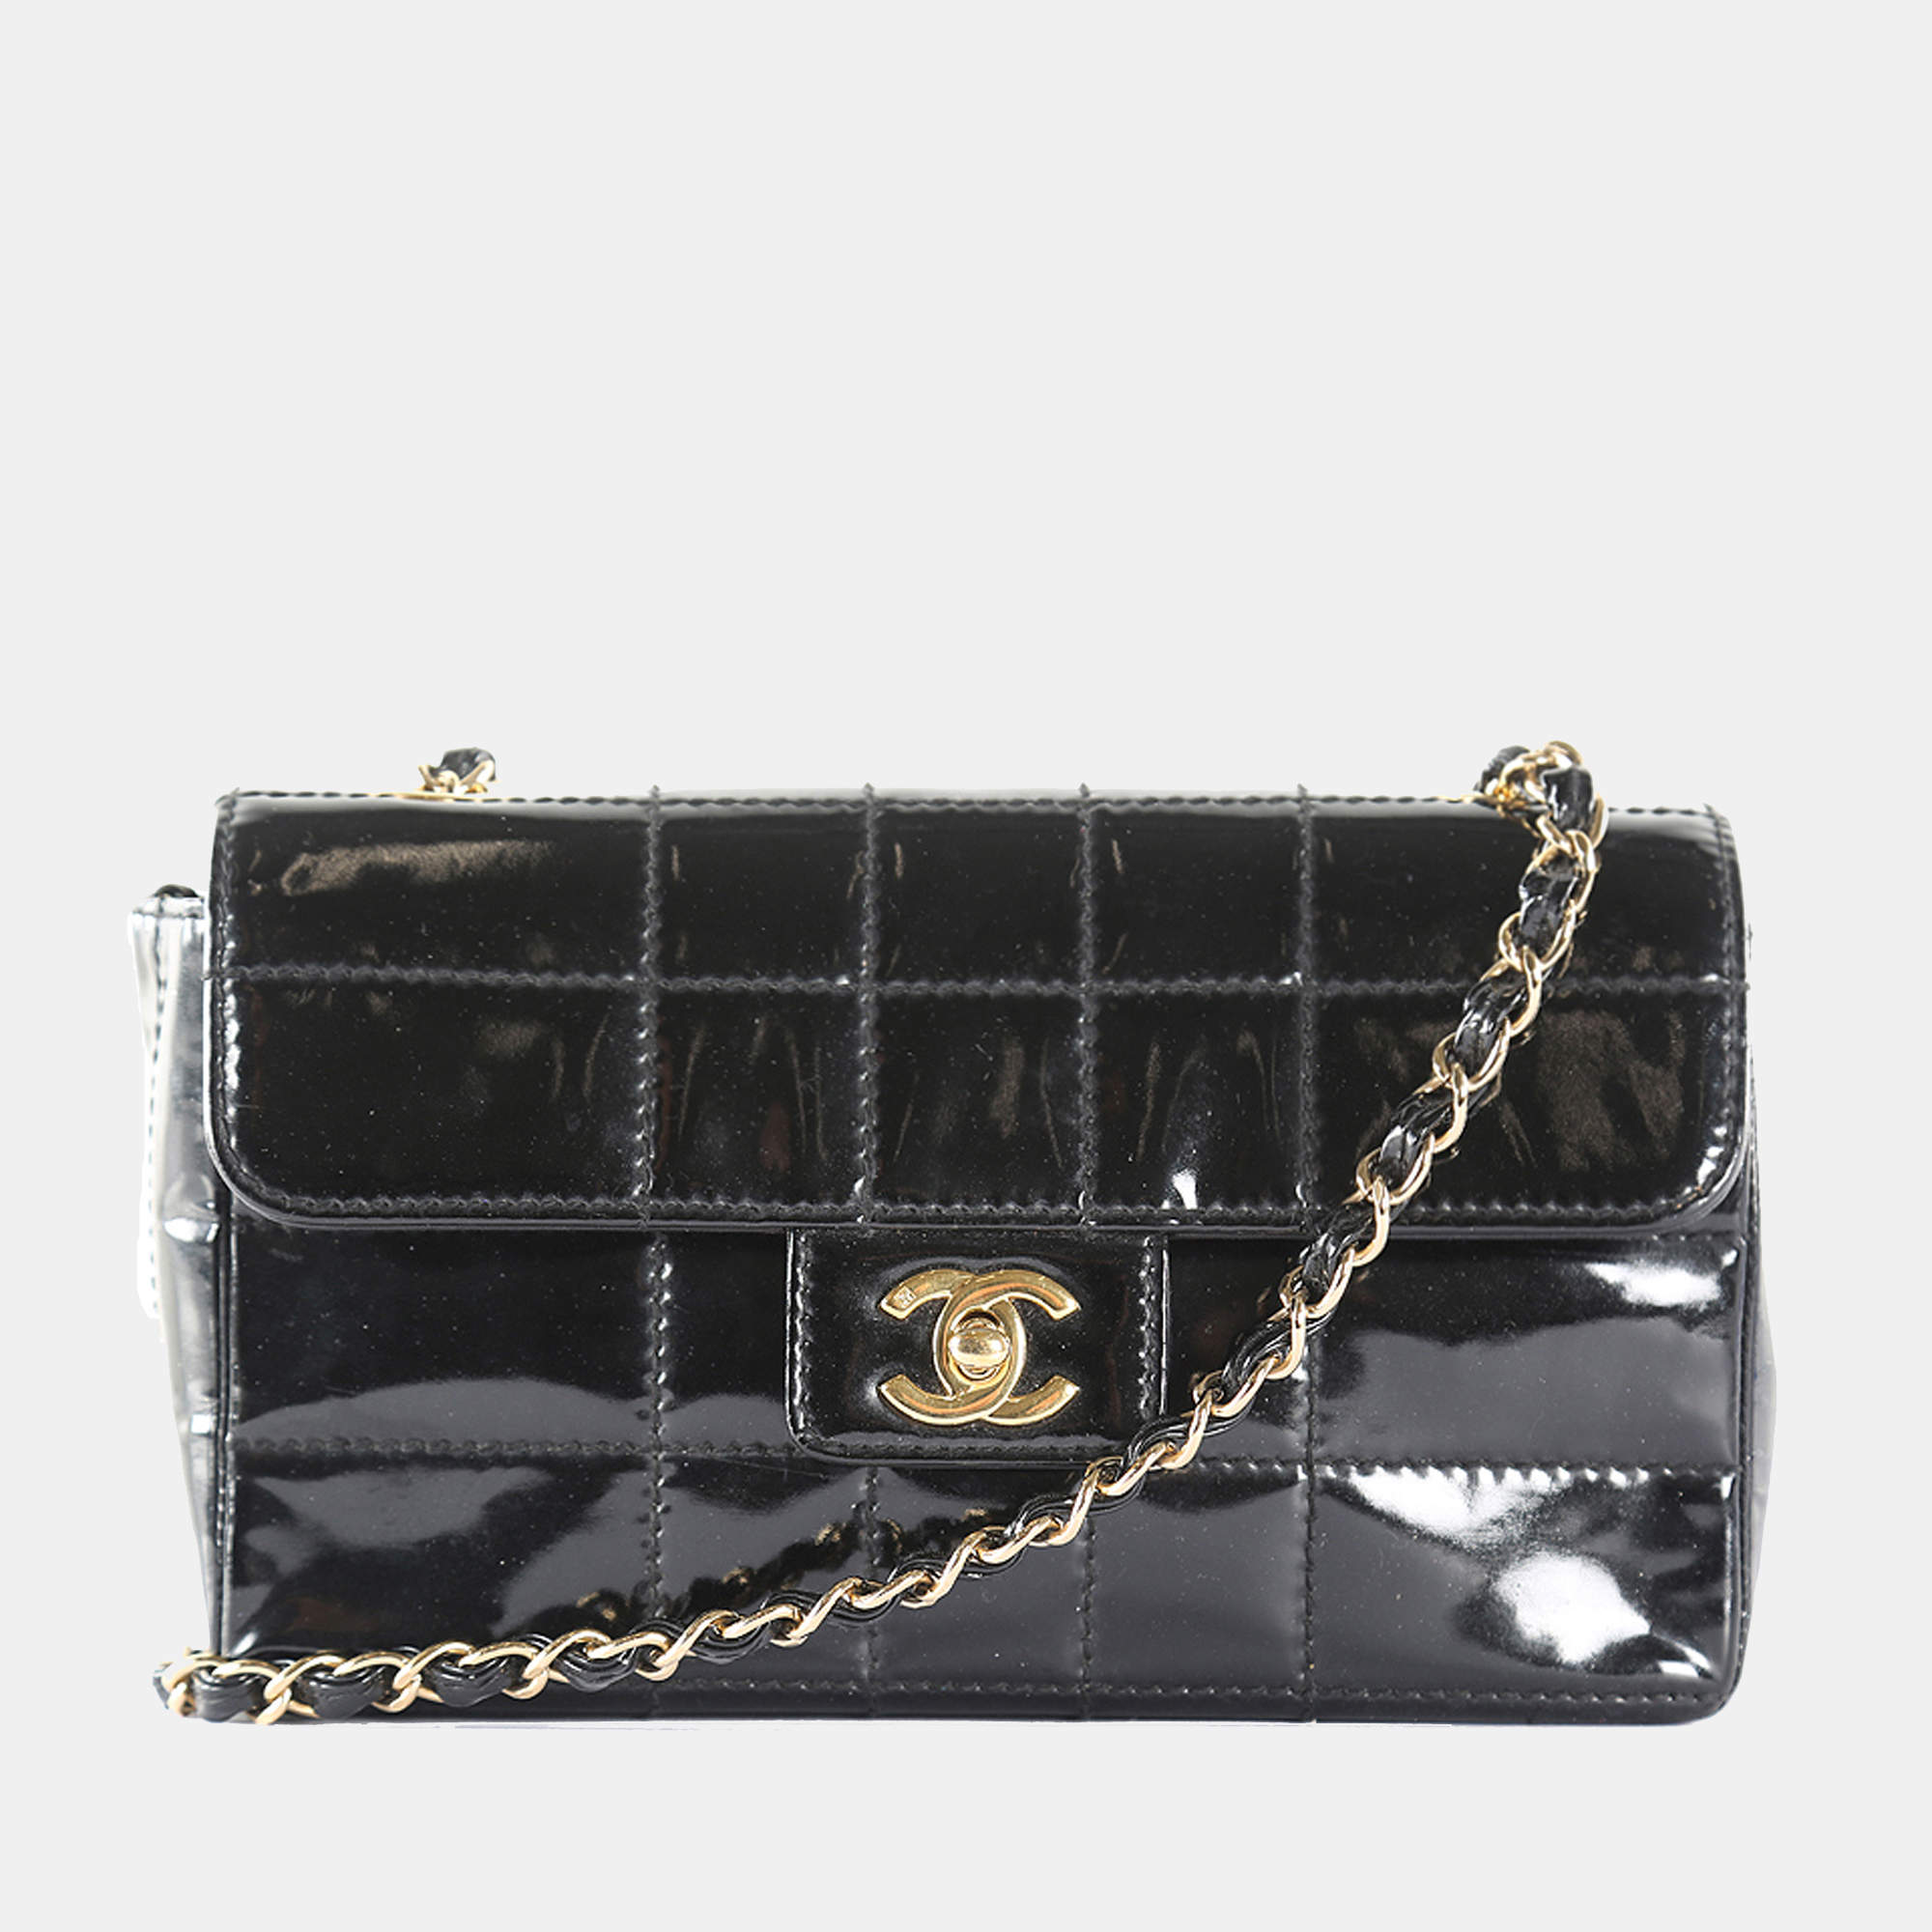 Chanel Black Patent Leather Quilted Chocolate Shoulder Bag | TLC